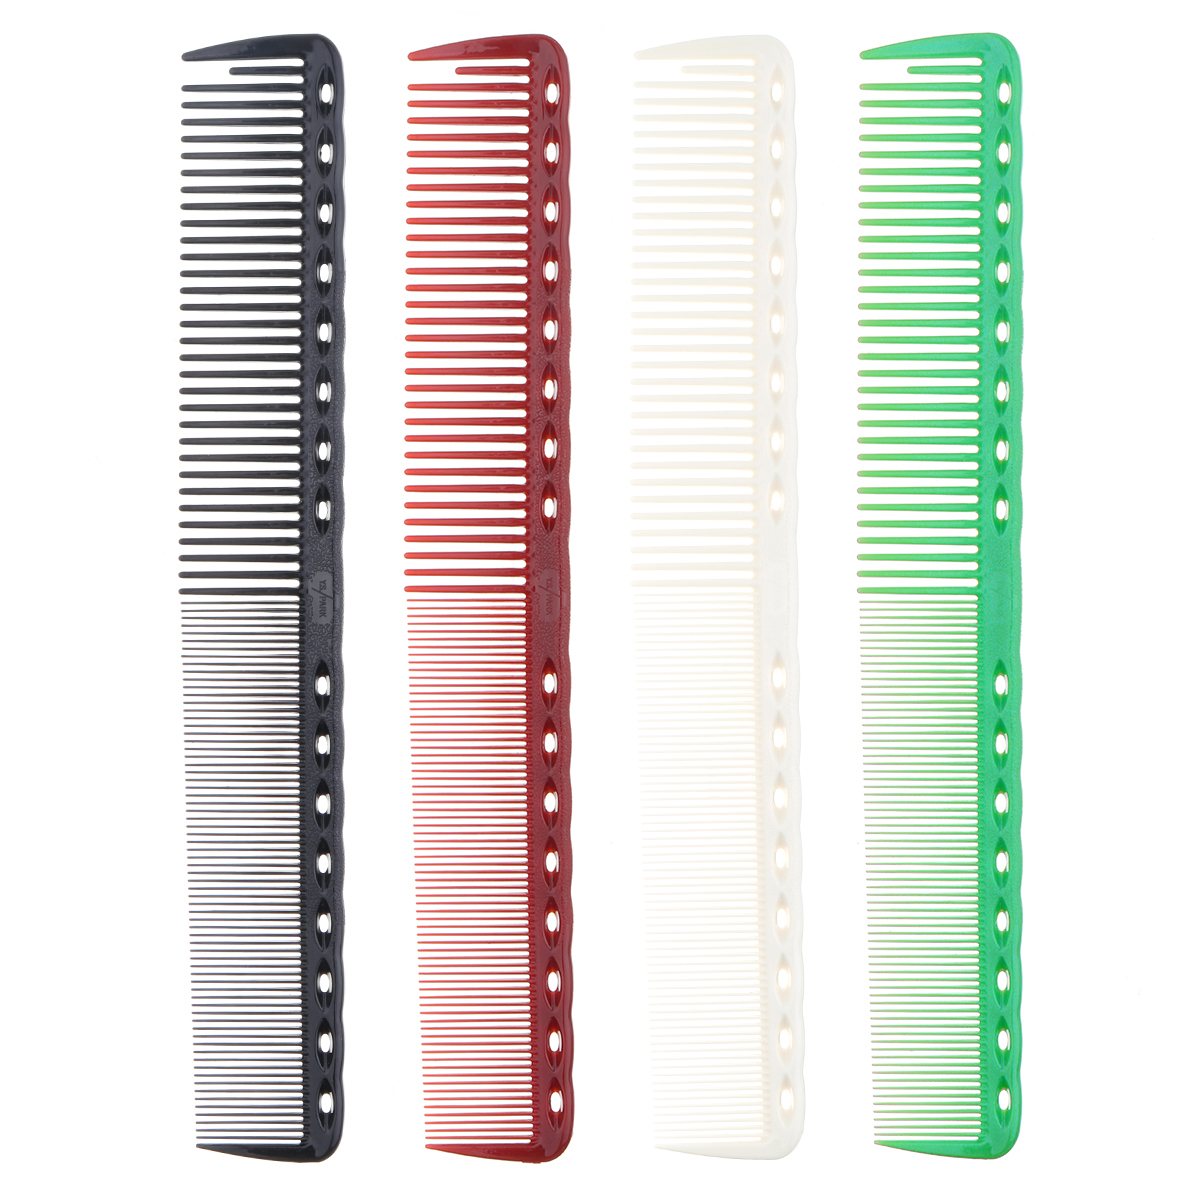 

4 Colors Professional Hair Combs Barber Hairdressing Hair Cutting Brush Anti-static Tangle Pro Salon Hair Care Styling Tool